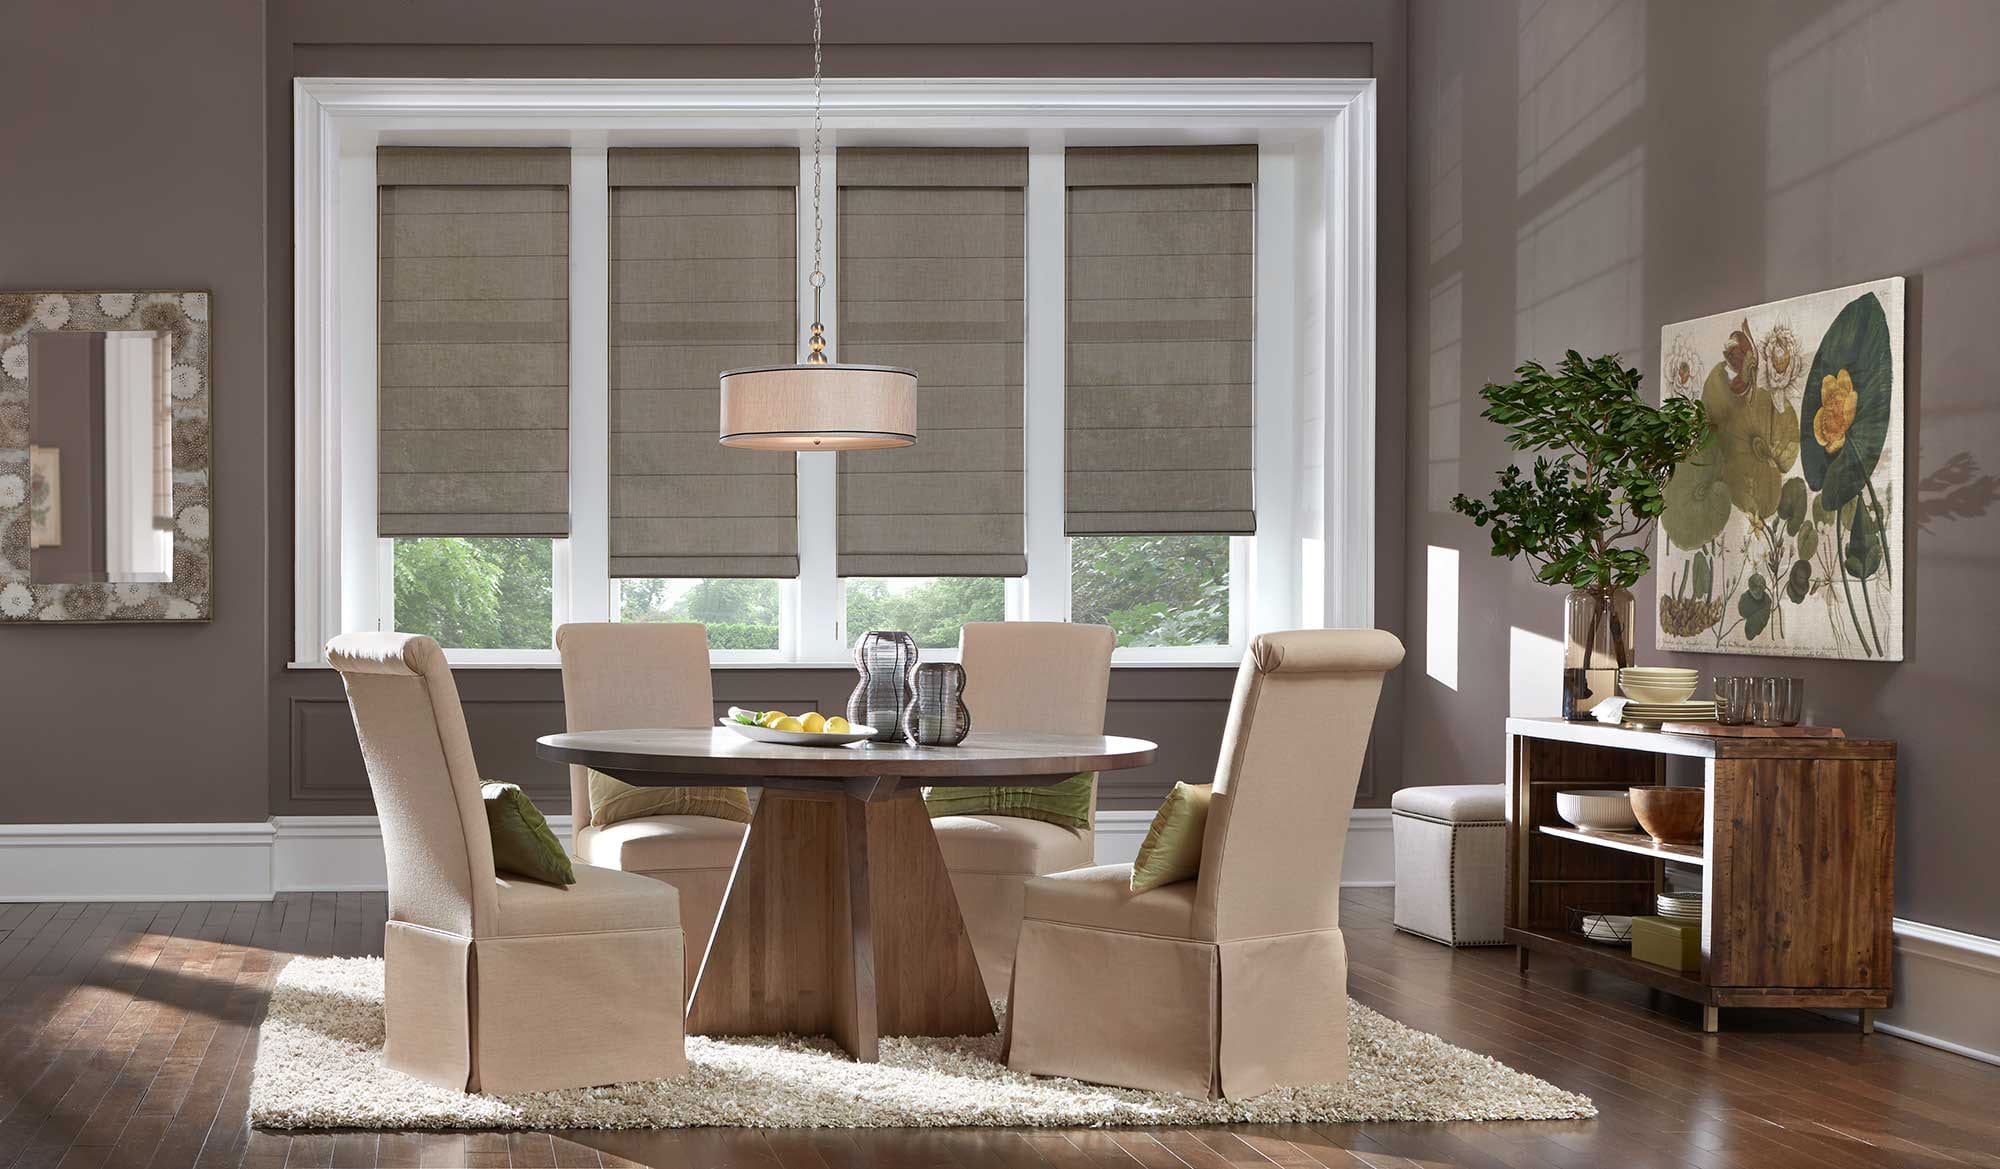 Roman shades in a dining room.